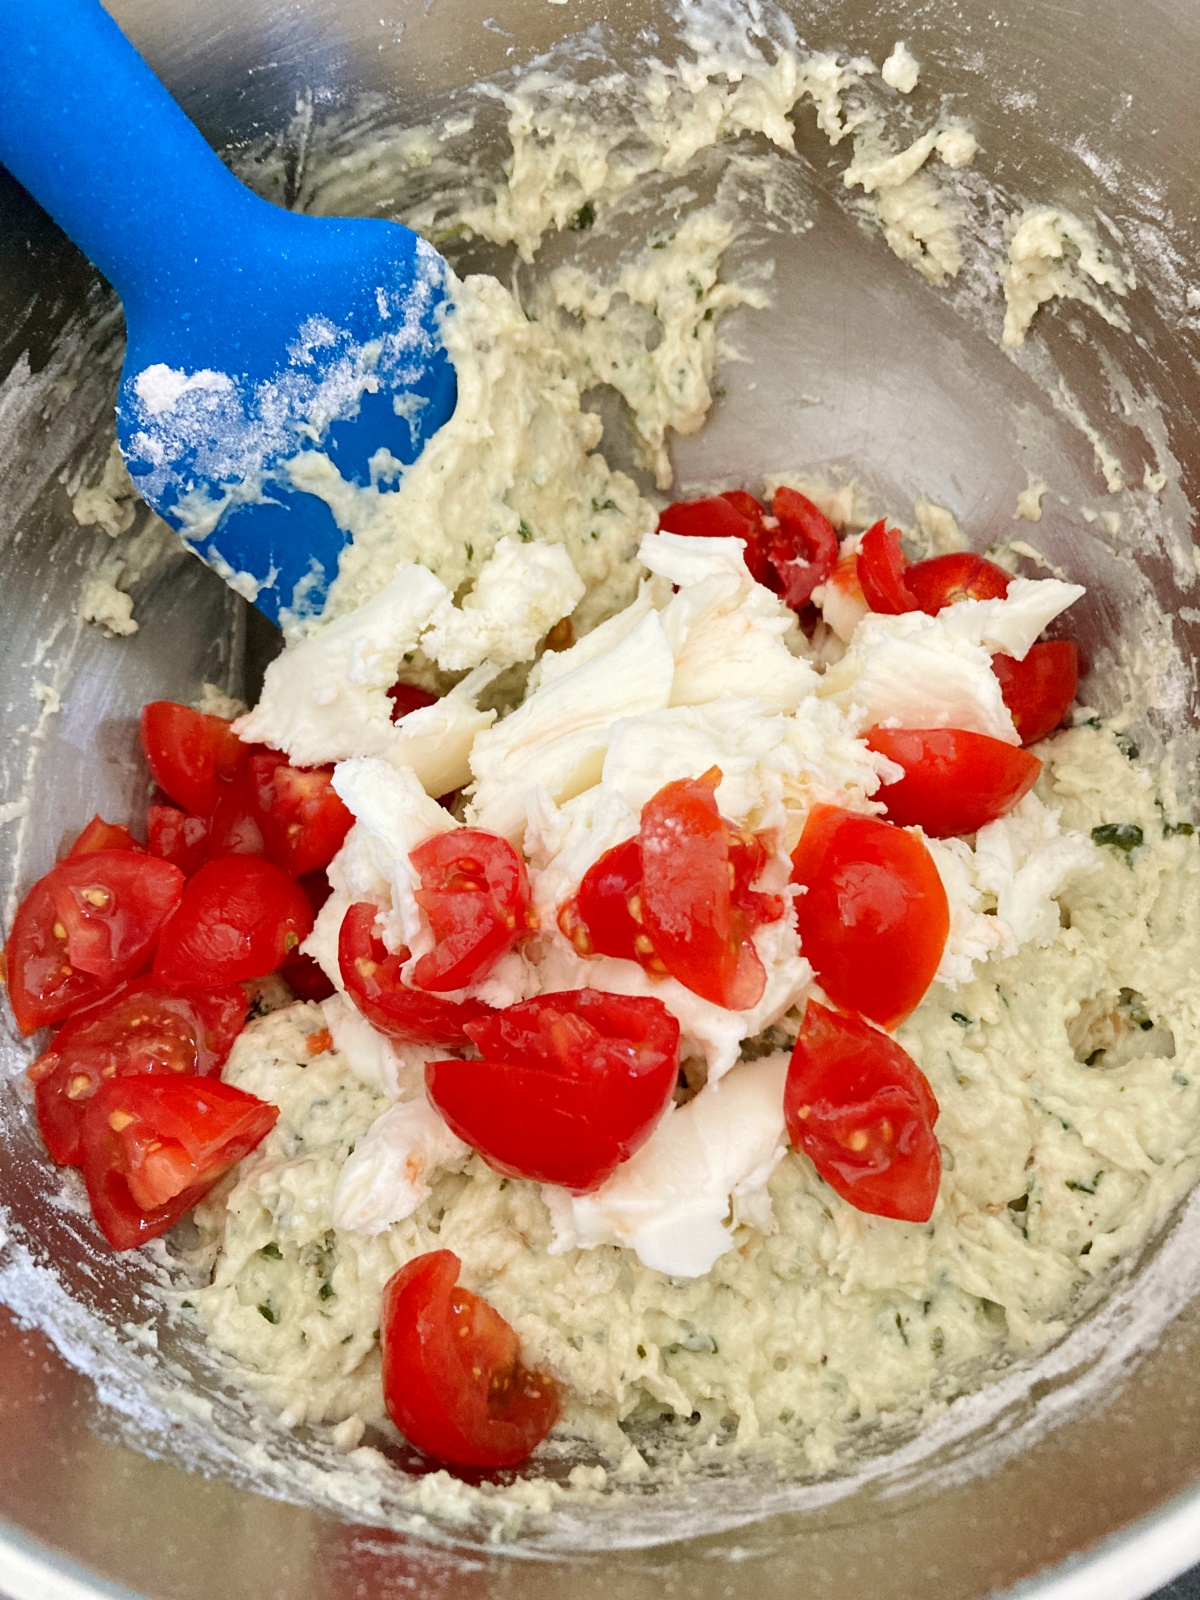 Preheat oven to 350˚F. In a large bowl combine flour, salt, pepper, baking powder, baking soda, basil, parsley, and garlic powder. In another bowl combine egg, yogurt, olive oil, milk, and basil paste. Slowly add dry ingredients to wet. Fold in mozzarella and tomatoes.